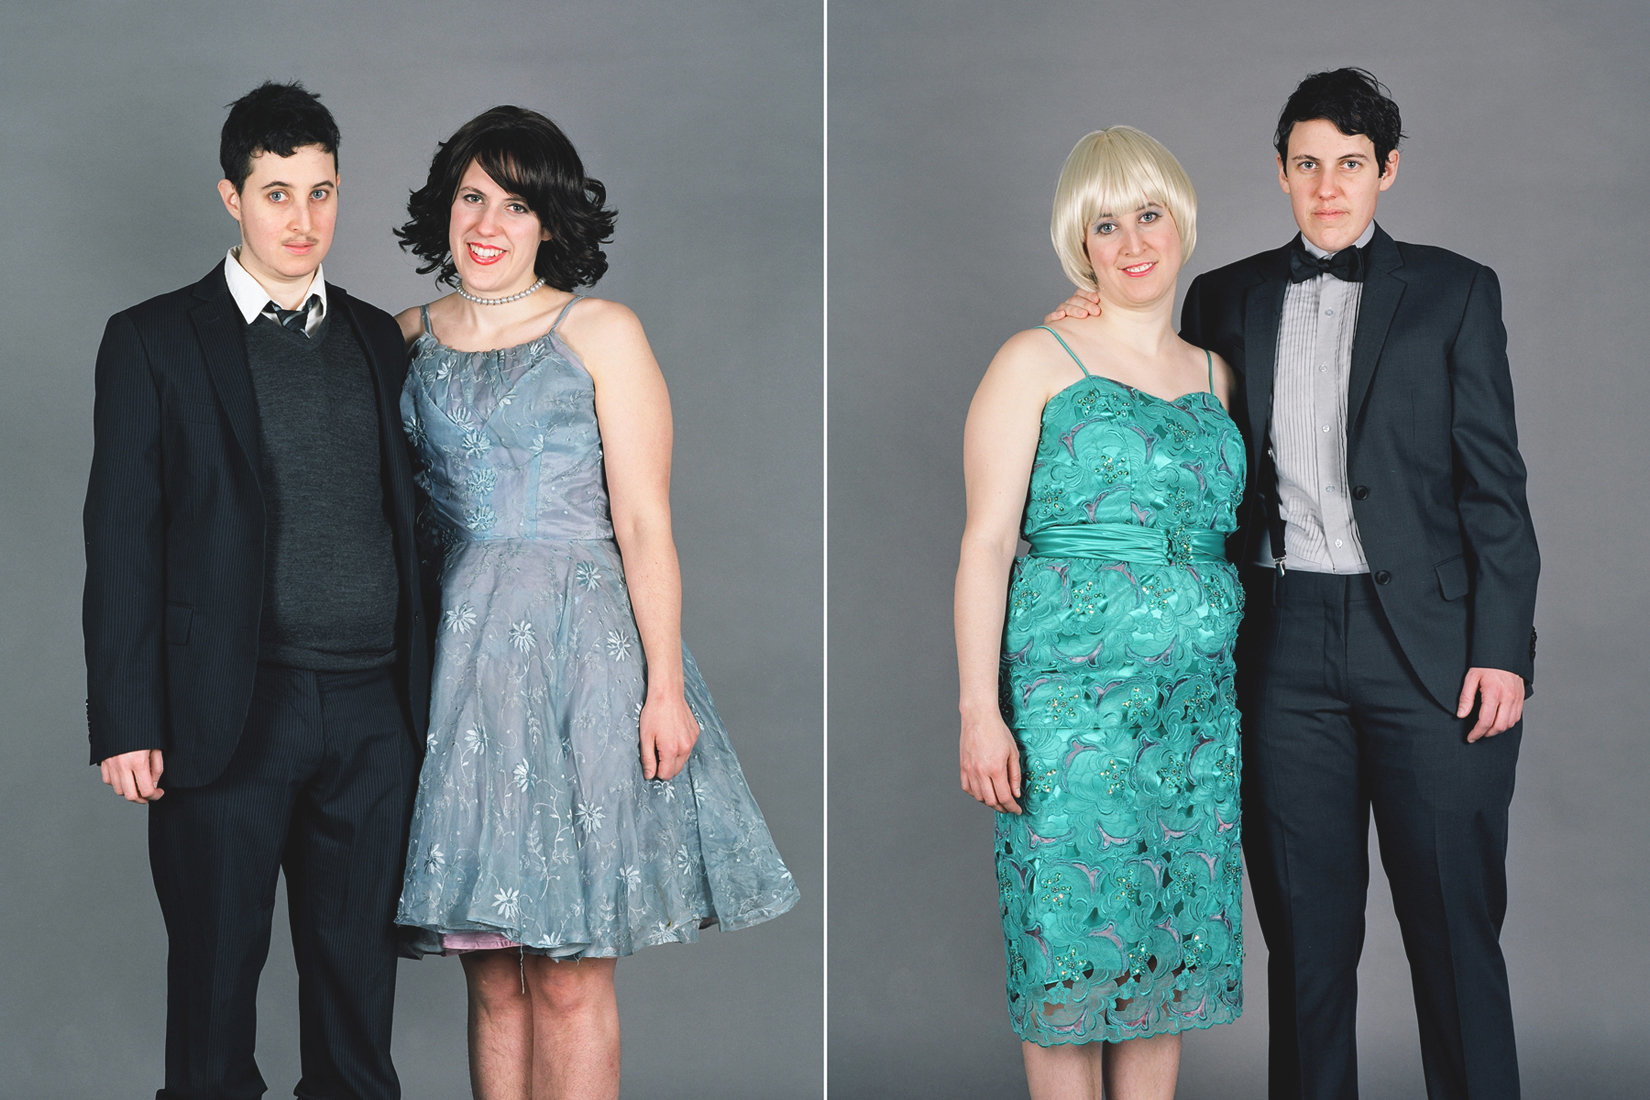 Awkward Prom Photos Have Gone Queer, And We Couldnt Be Happier HuffPost Entertainment